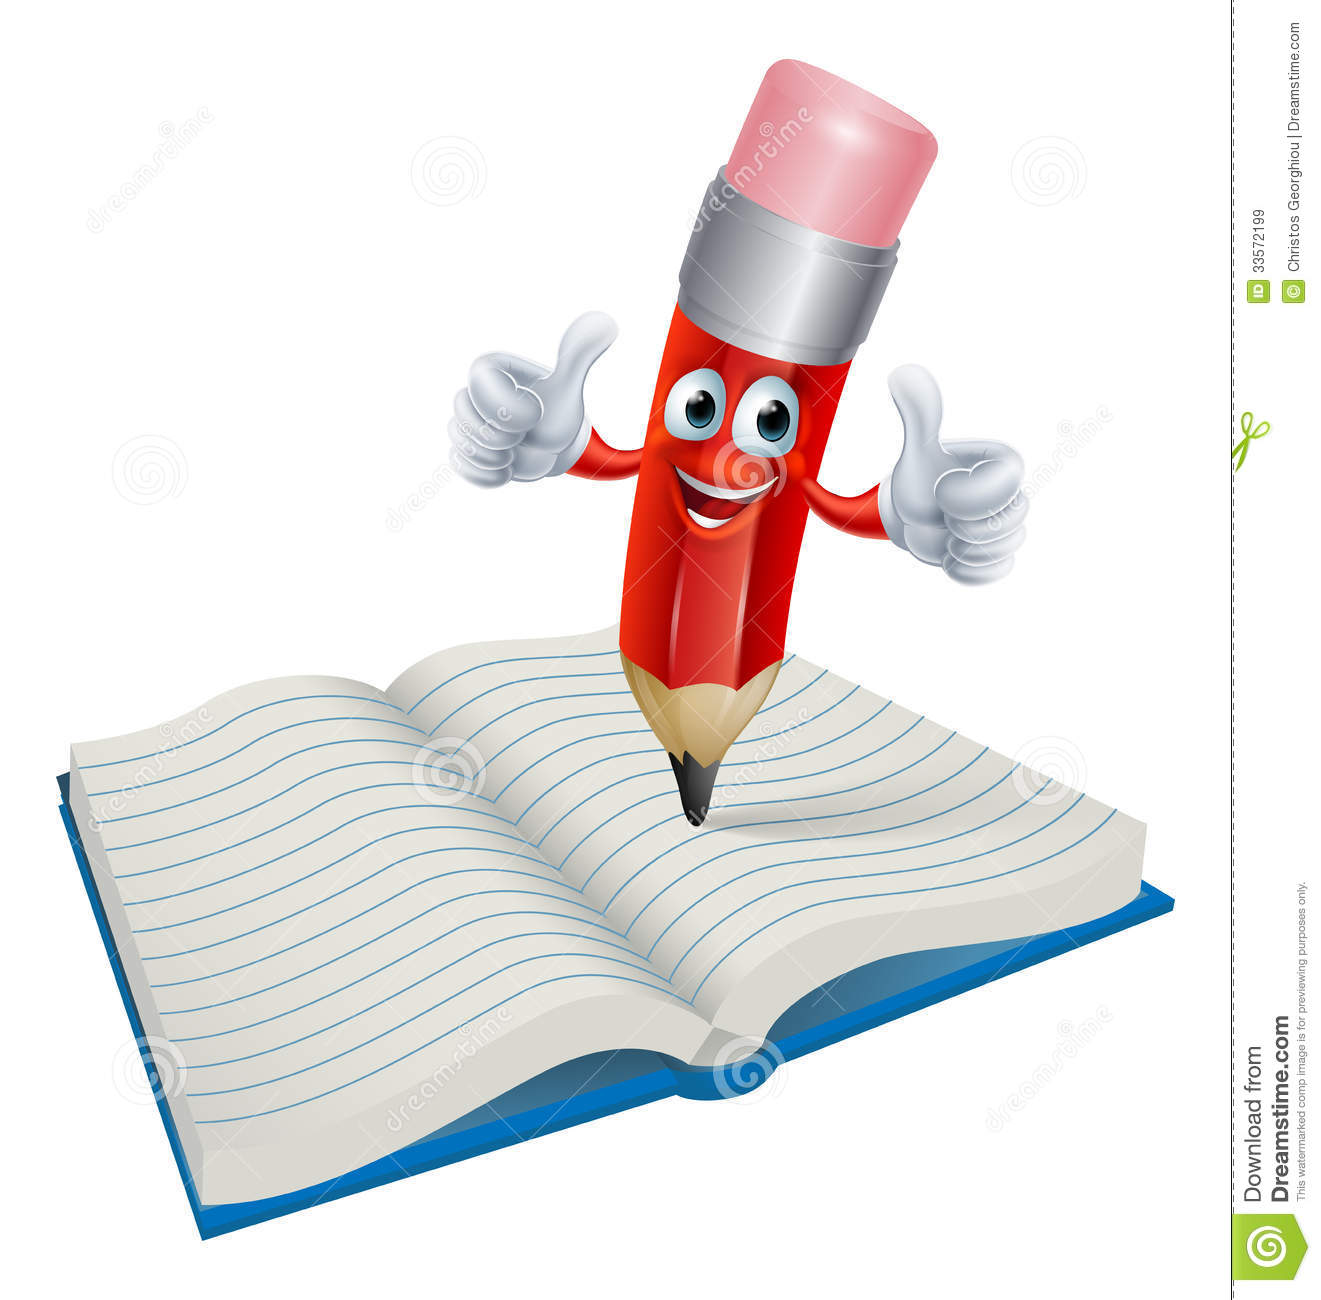 Cartoon Pencil Man Writing In Book Royalty Free Stock Images   Image    